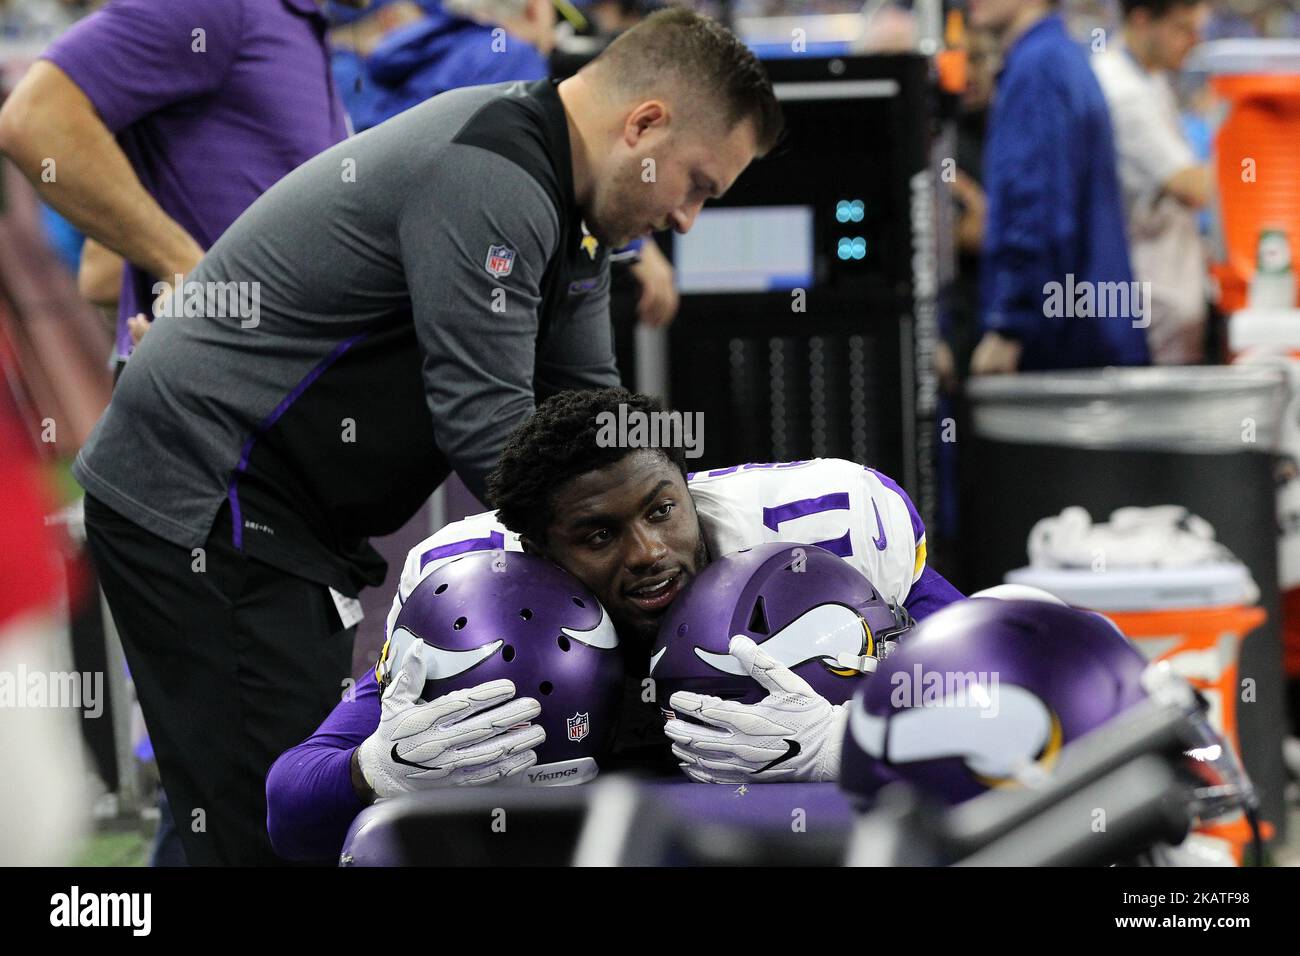 Minnesota Vikings wide receiver Laquon Treadwell (11) rests his head over two helmets as he is worked on by Vikings staff during the first half of an NFL football game against the Detroit Lions in Detroit, Michigan USA, on Thursday, November 23, 2017. (Photo by Jorge Lemus/NurPhoto) Stock Photo